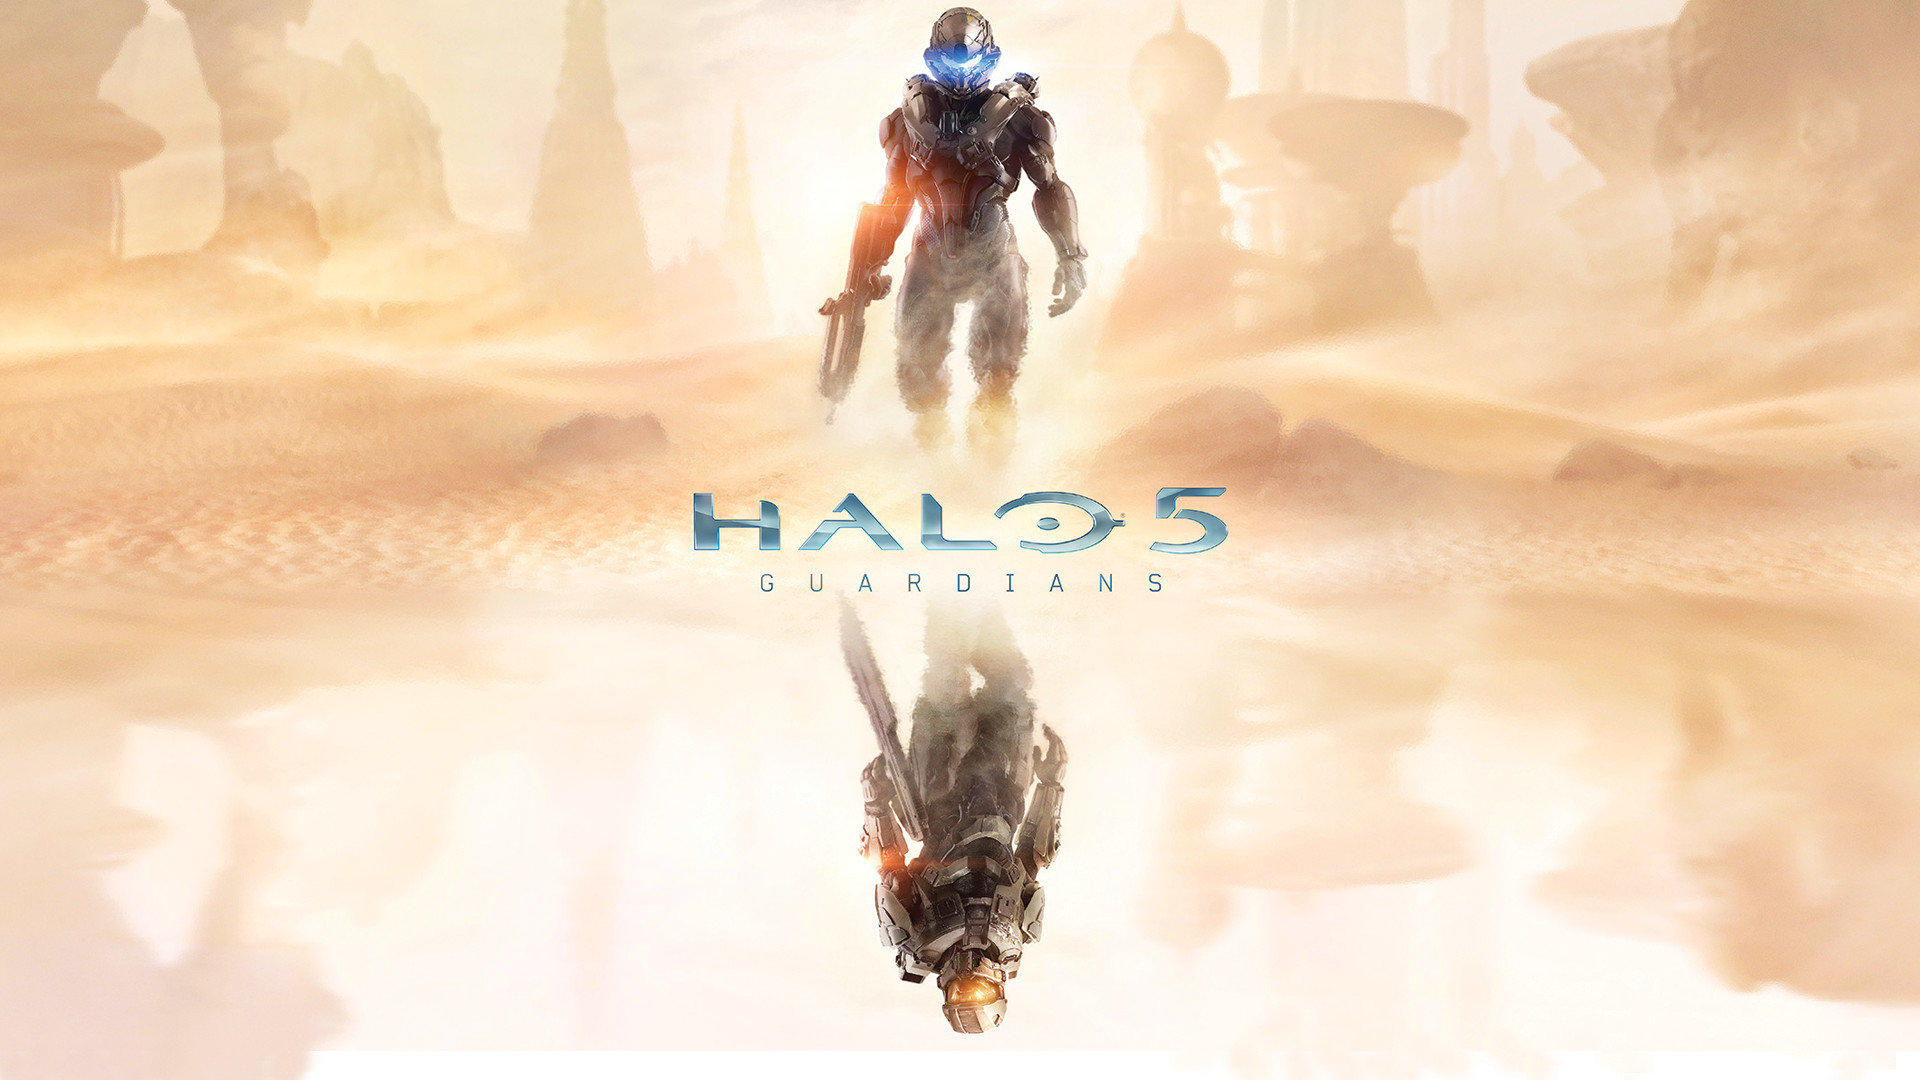 Download full hd 1920x1080 Halo 5: Guardians computer wallpaper ID:116997 for free